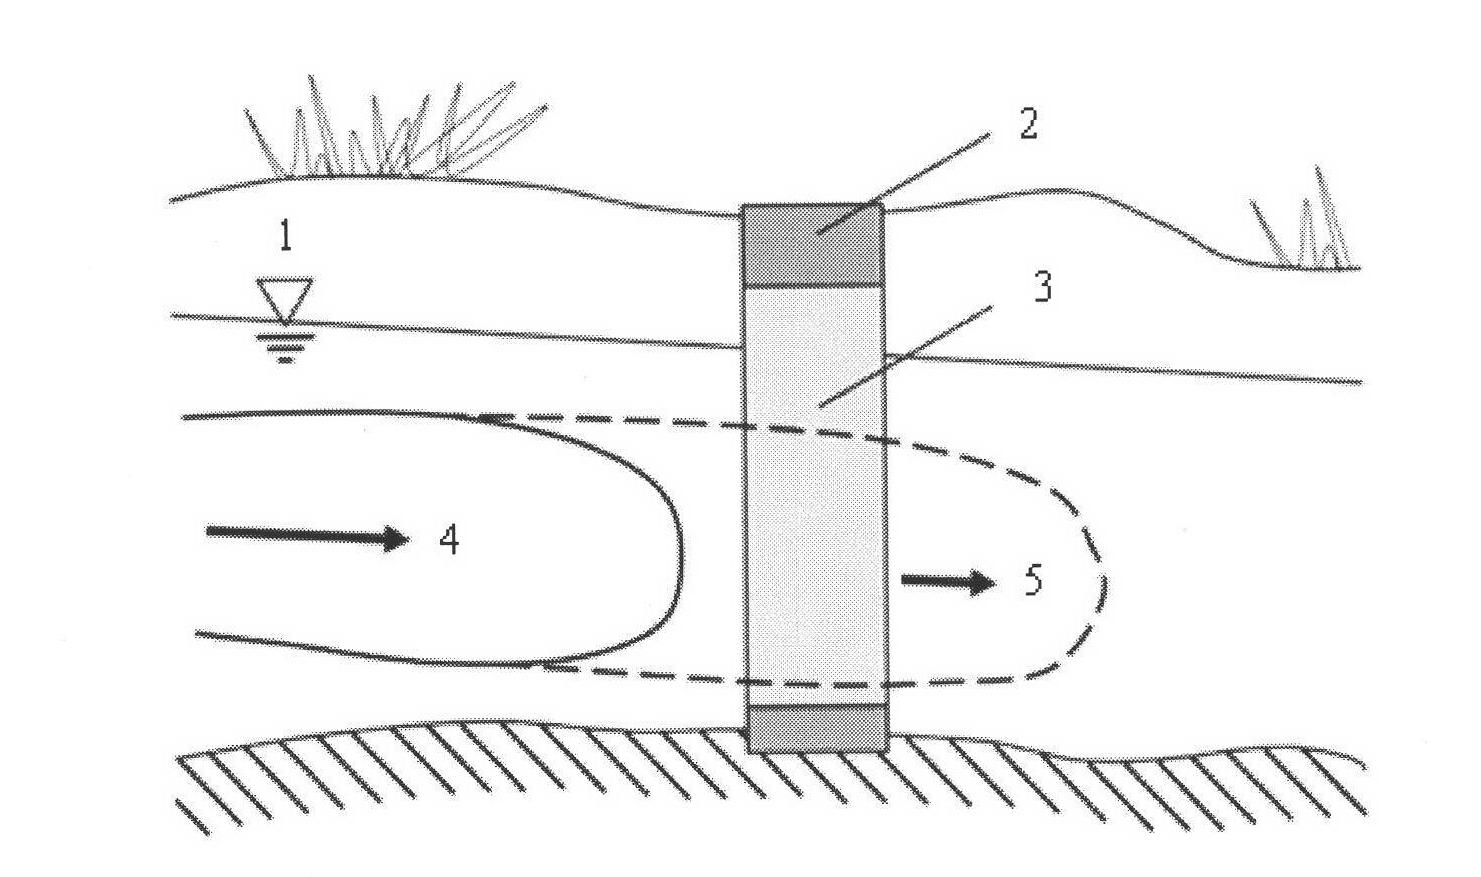 Method for in-situ or ex-situ remediation of groundwater nitrate pollution by utilization of wheat straws